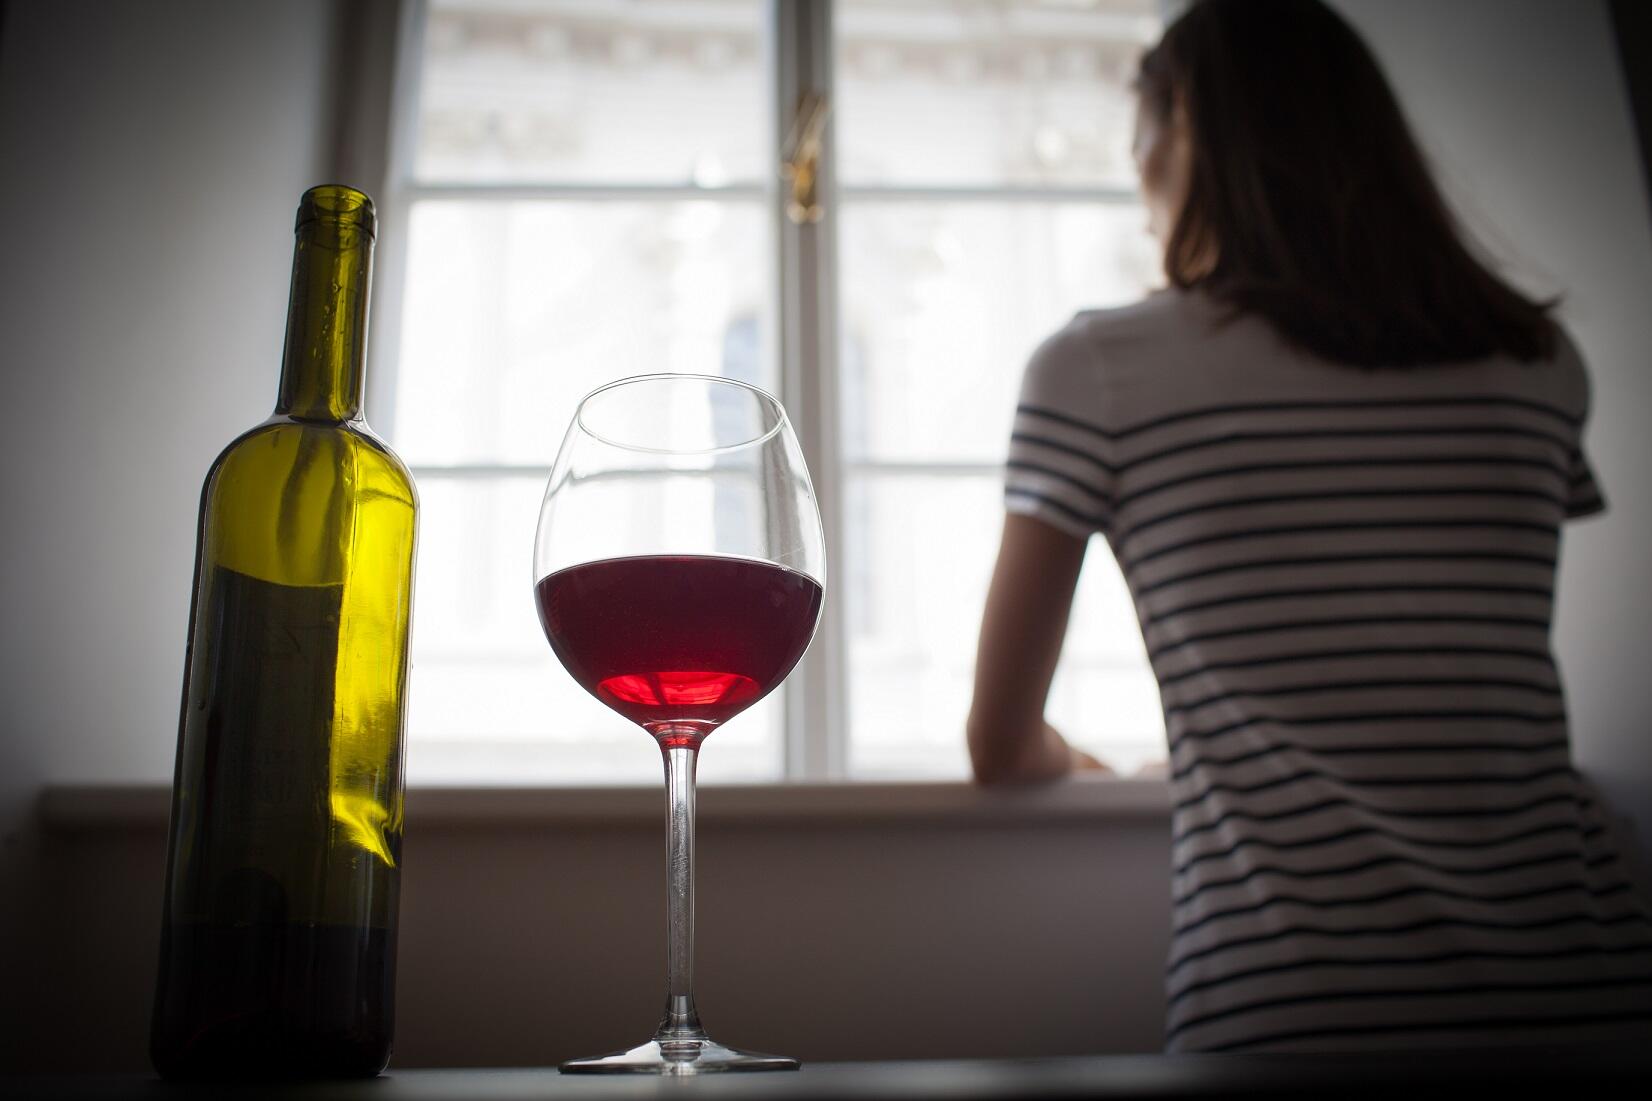 A green bottle and a glass half-full of red wine sit in the foreground. In the background, a woman is looking out a window.